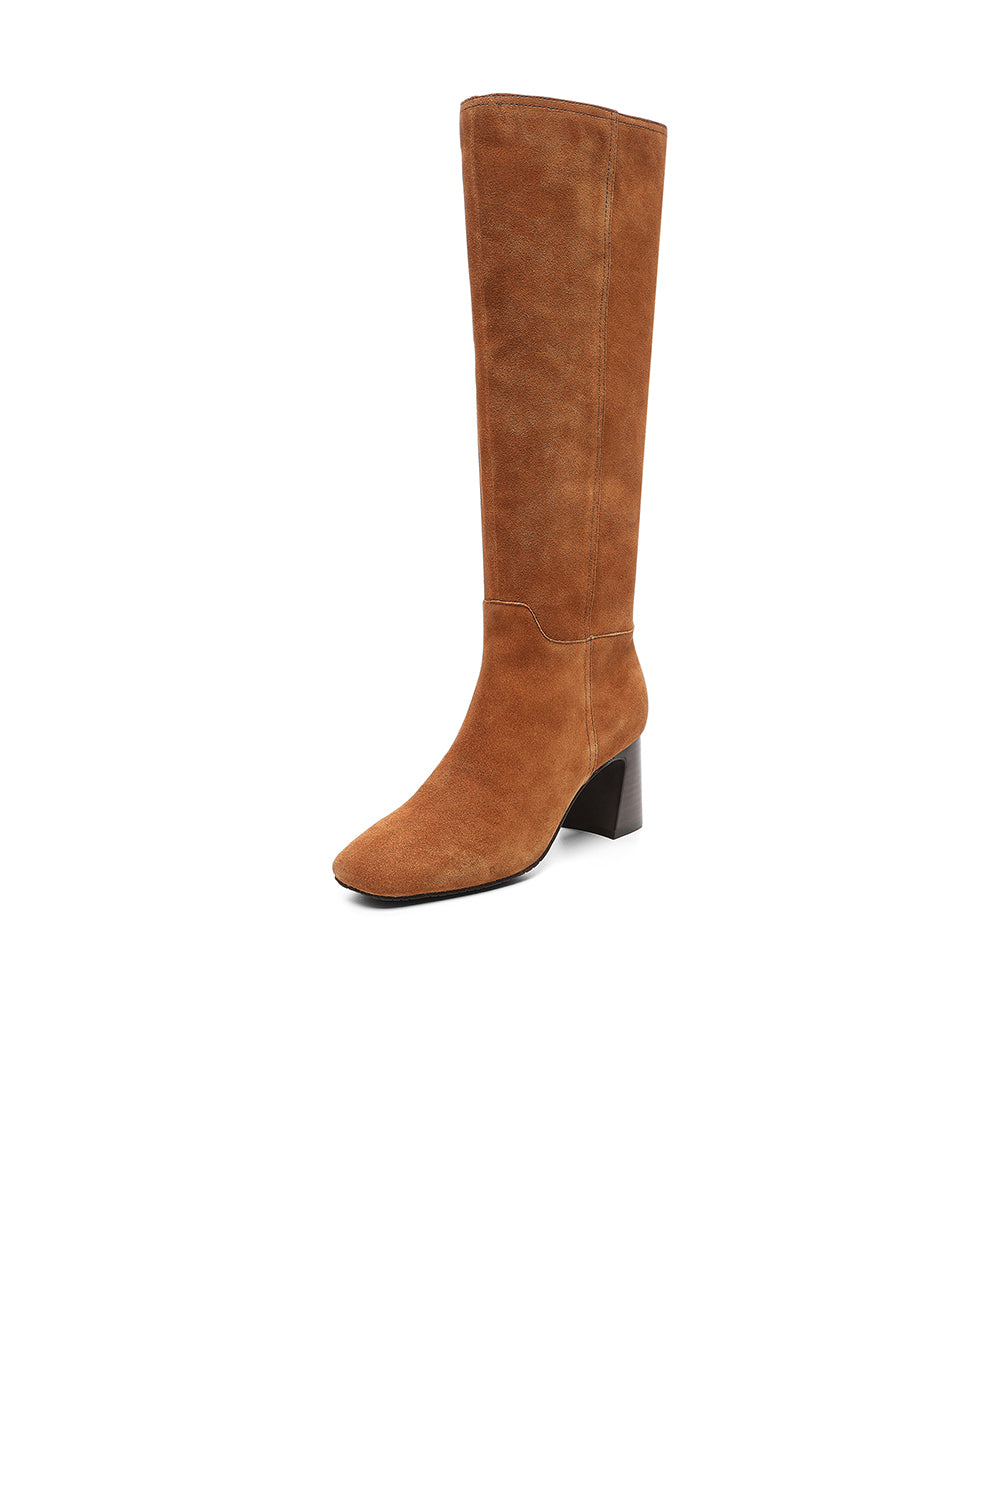 NYDJ Chelle Tall Boots In Calf Suede - Saddle